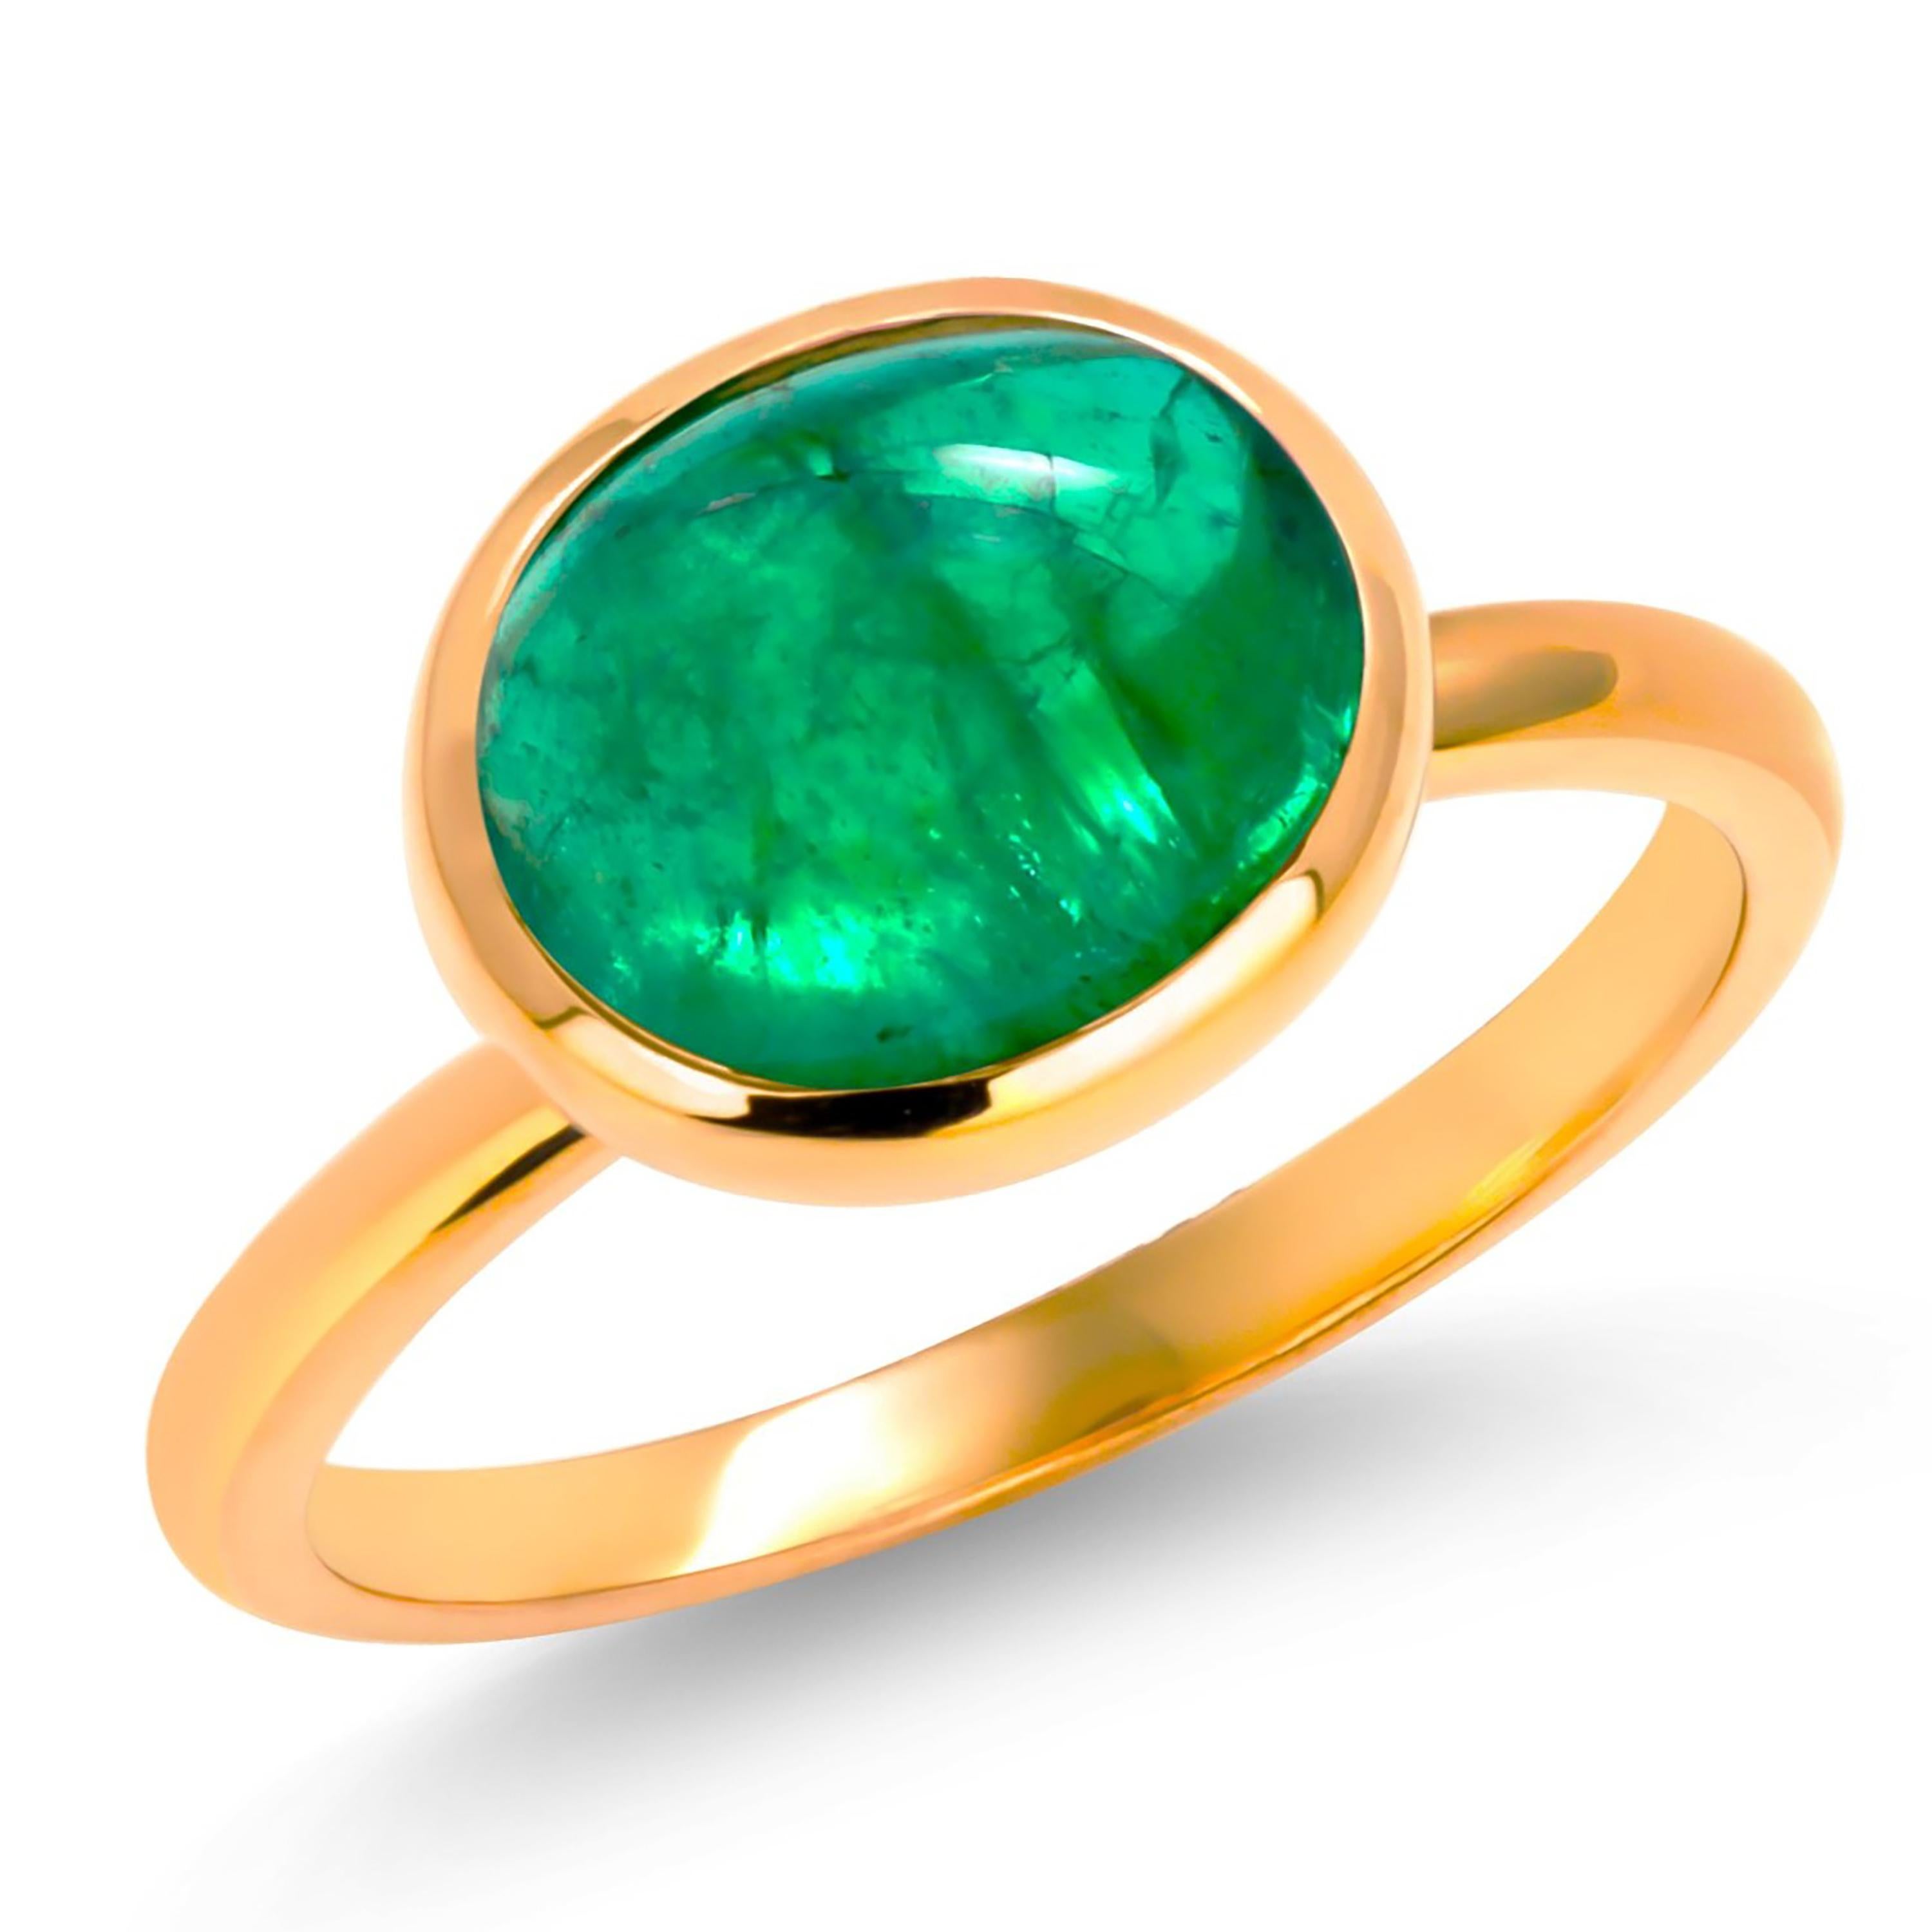 Cabochon Emerald 2.50 Carat Solitaire Yellow Gold Bezel Set Ring Size 6 For Sale 3